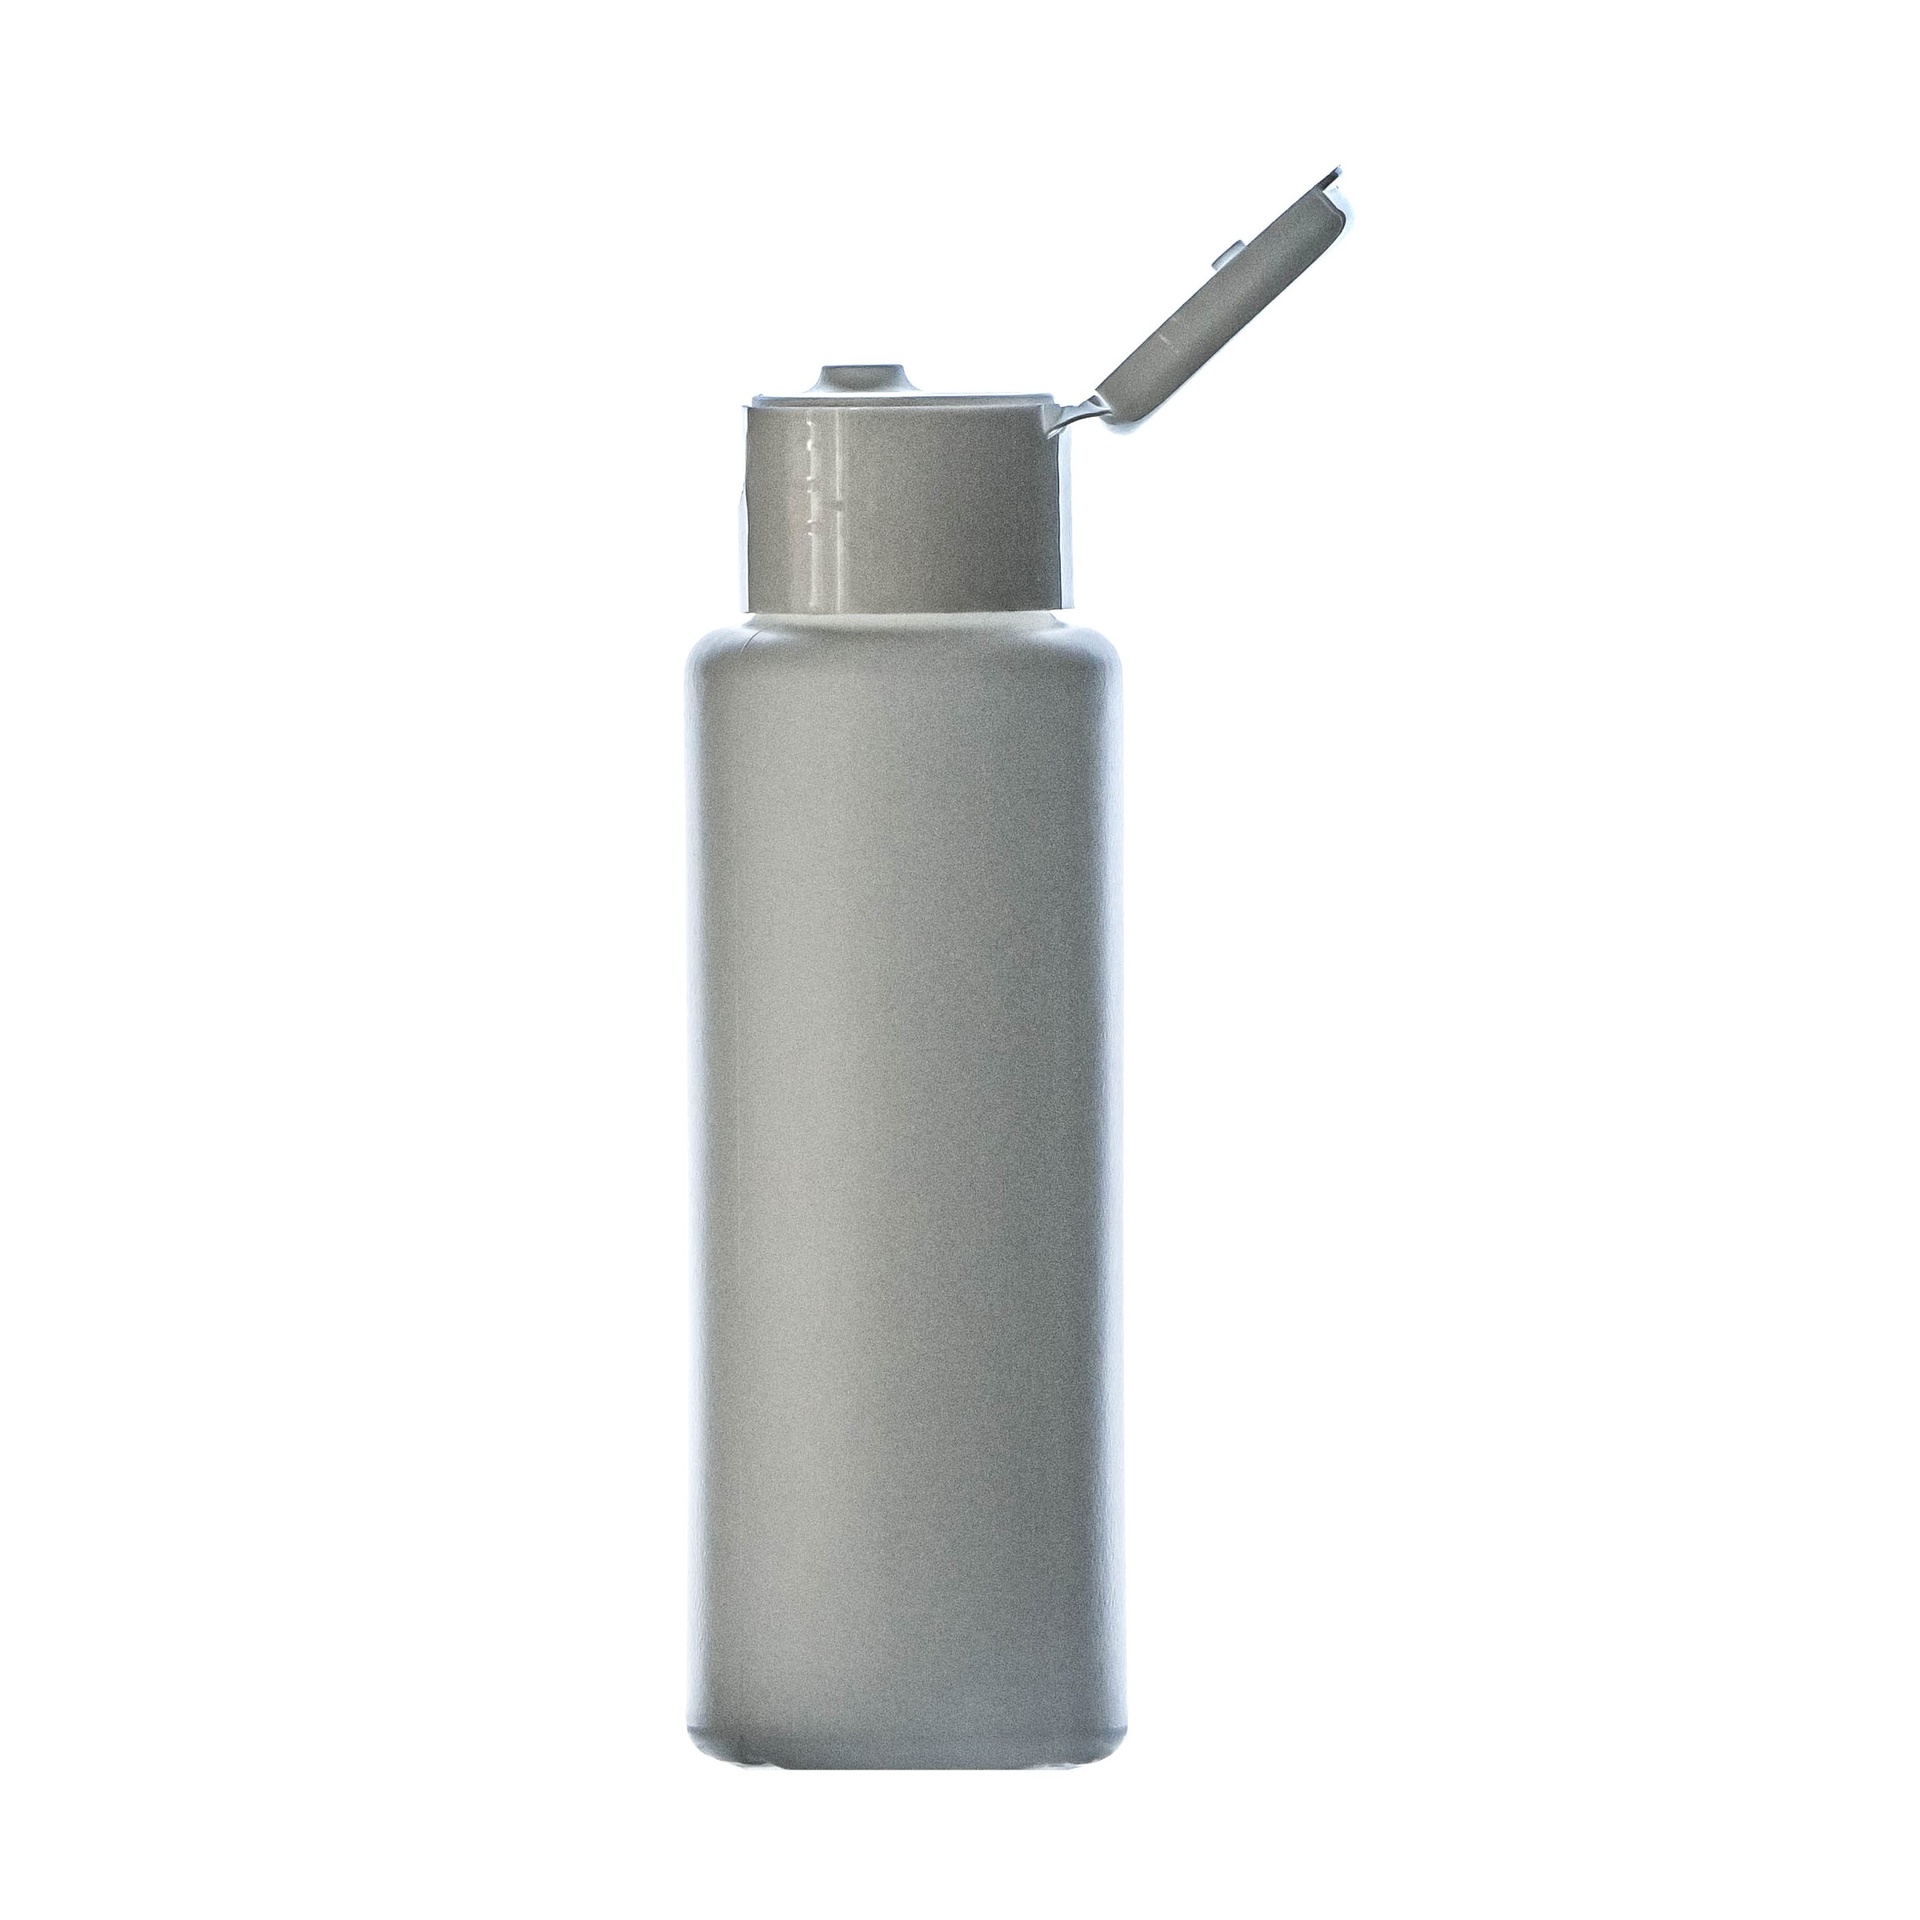 60ml White HDPE Cylindrical Bottle, 22/415 Neck to suit 225FTW